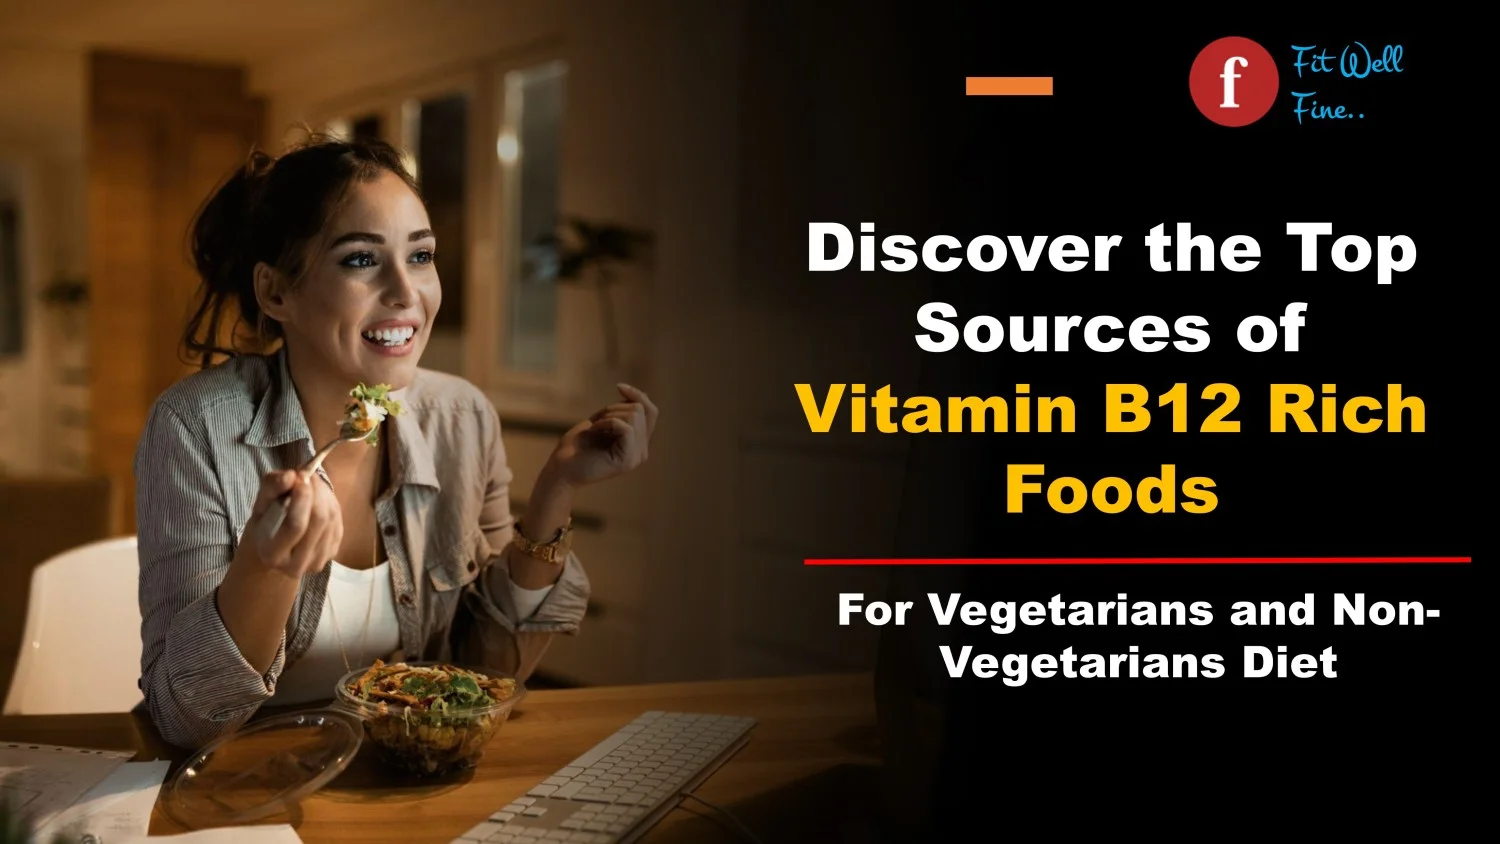 Top Sources of Vitamin B12 Rich Foods